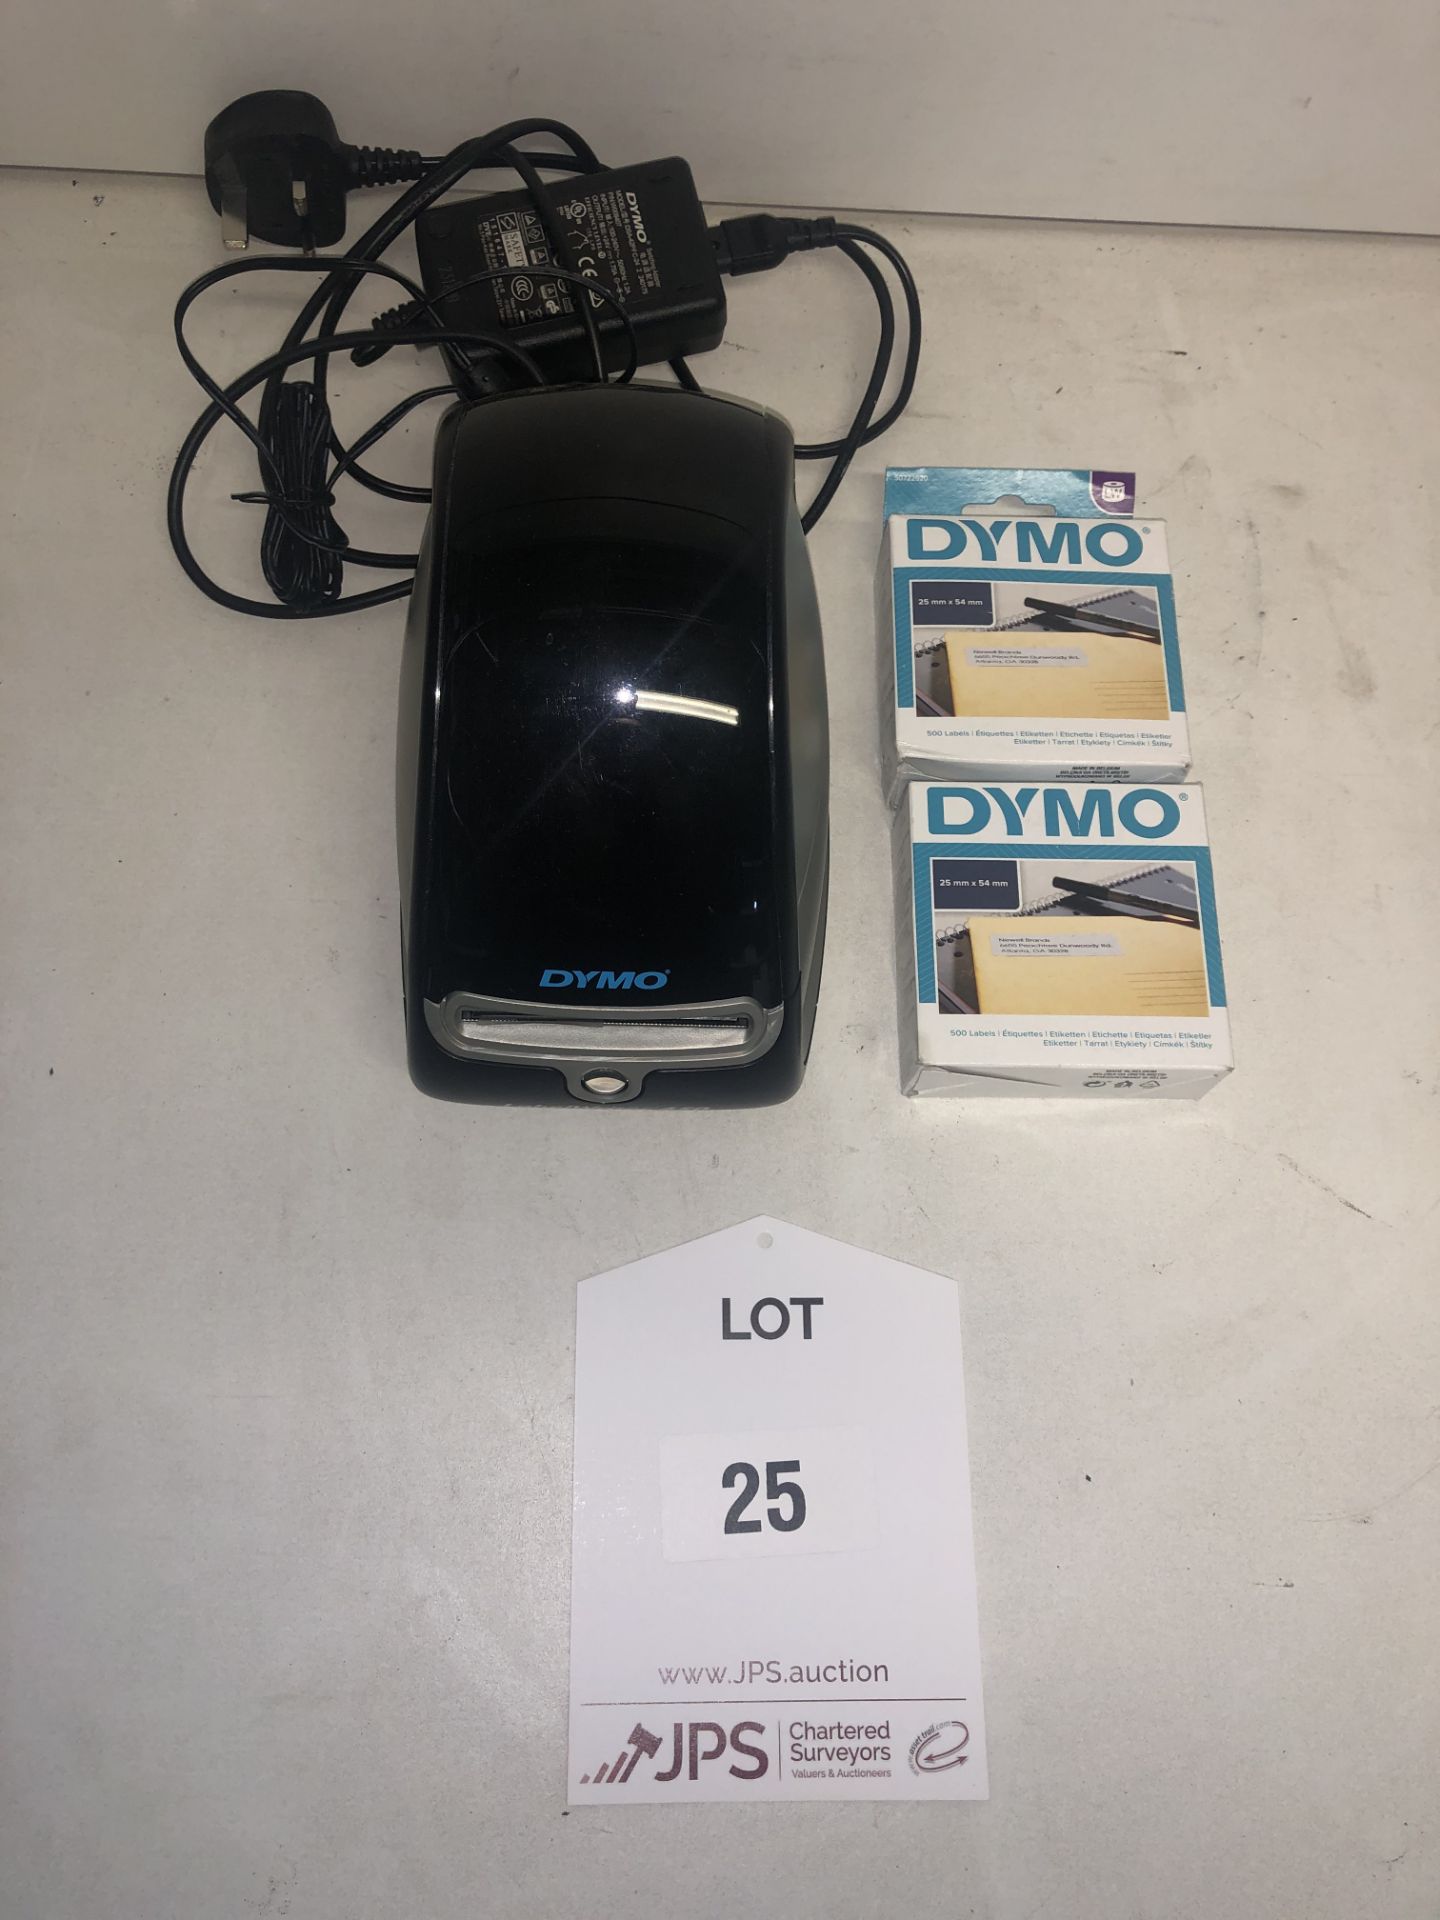 Dymo LabelWriter 450 Printer w/ 2 Packs of Labels & Power Lead - Image 2 of 4